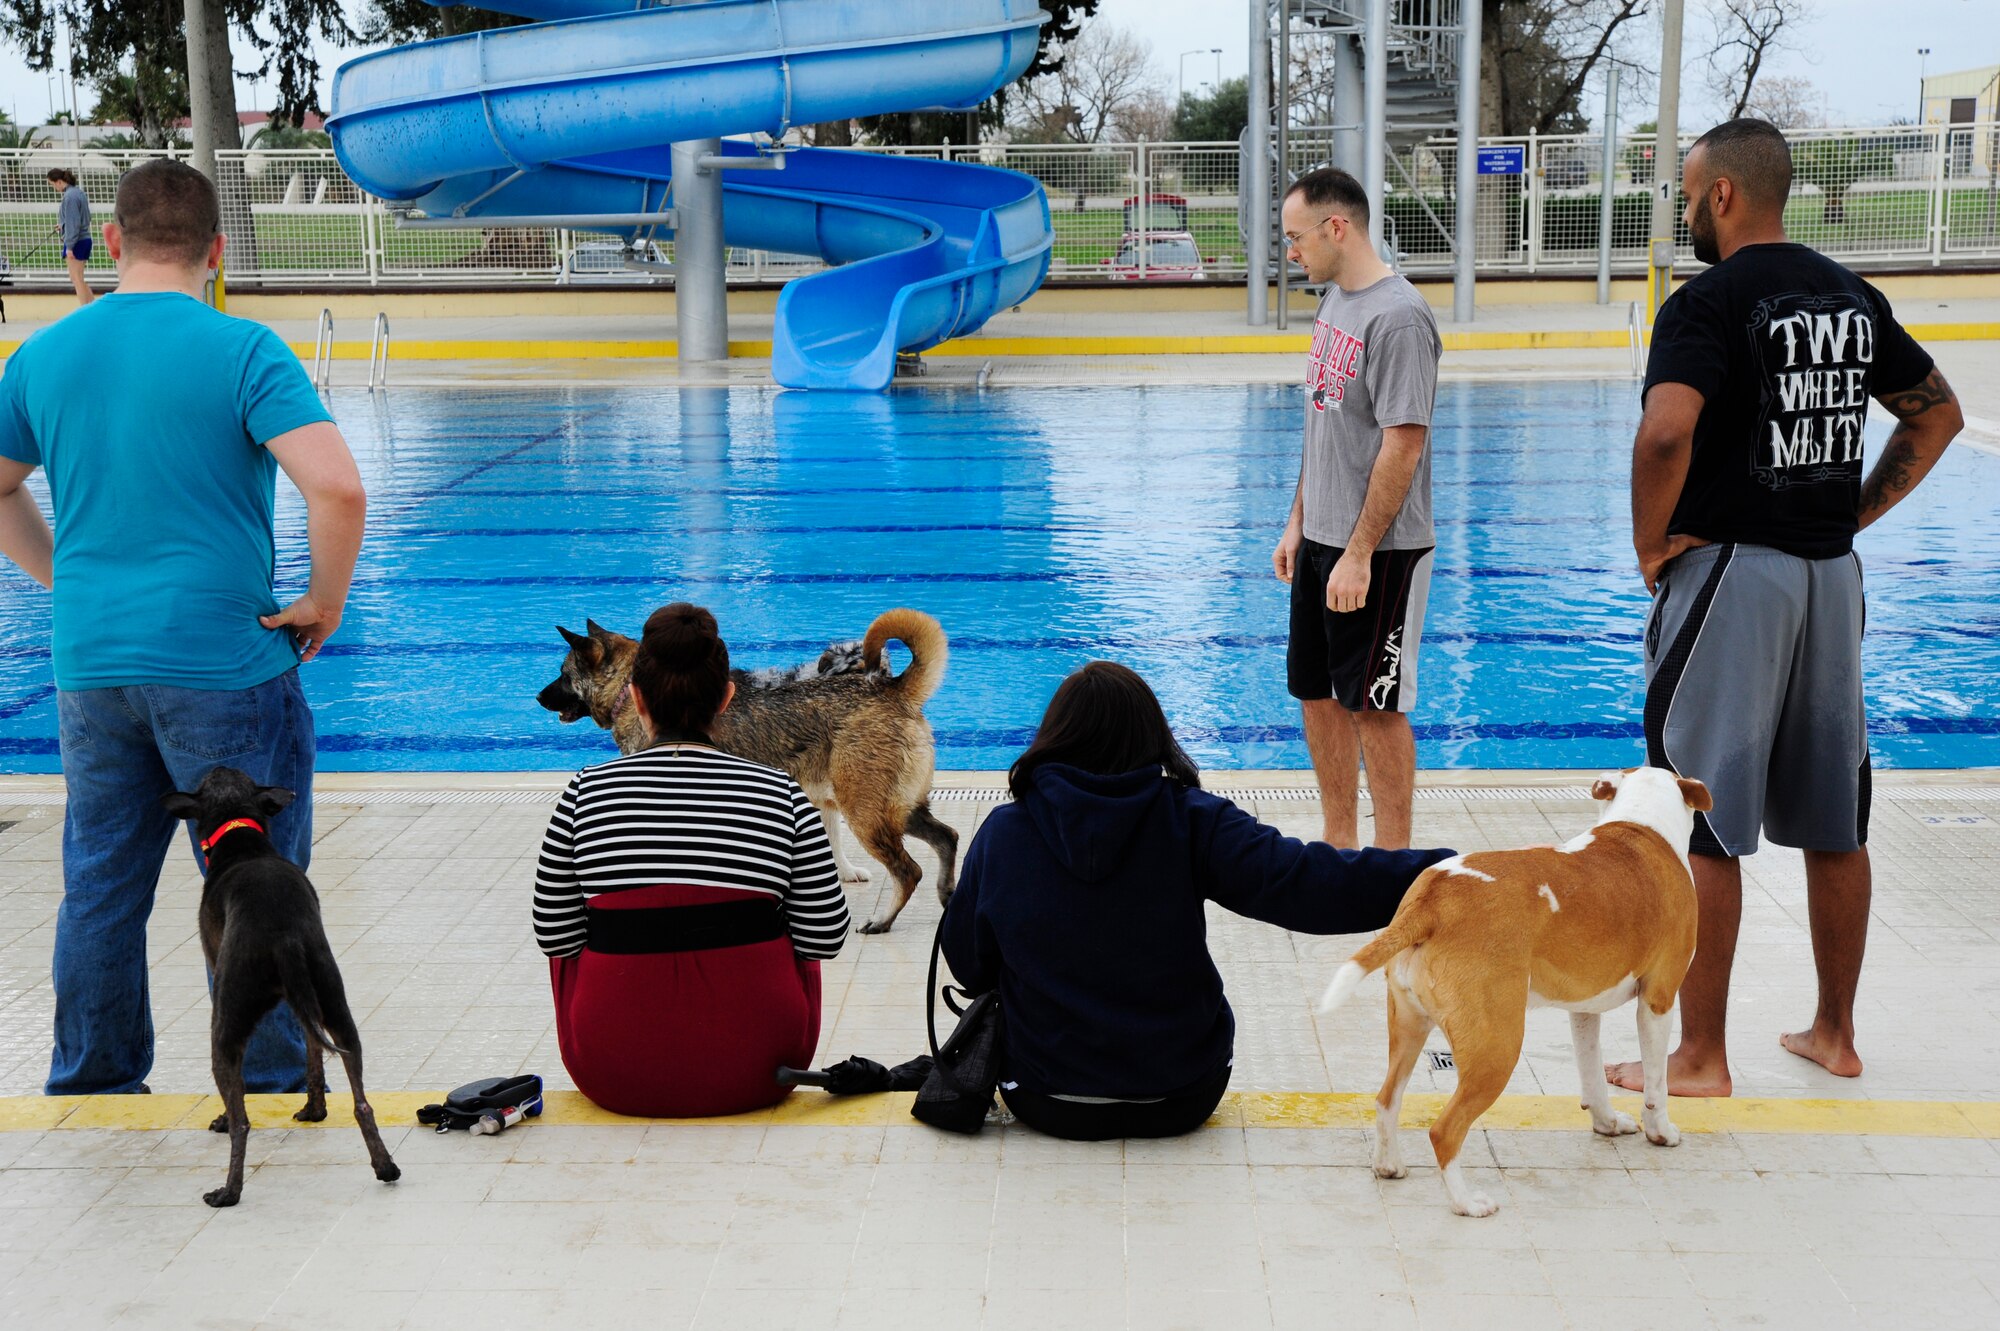 Titans relax by the base pool with their canine companions during the 2016 Dog Daze Feb. 27, 2016, at Incirlik Air Base, Turkey. Dog Daze was a pool event where Incirlik members brought their dogs to play fetch, swim and have fun before the pool opens for the spring season. (U.S. Air Force photo by Airman Daniel Lile/Released)